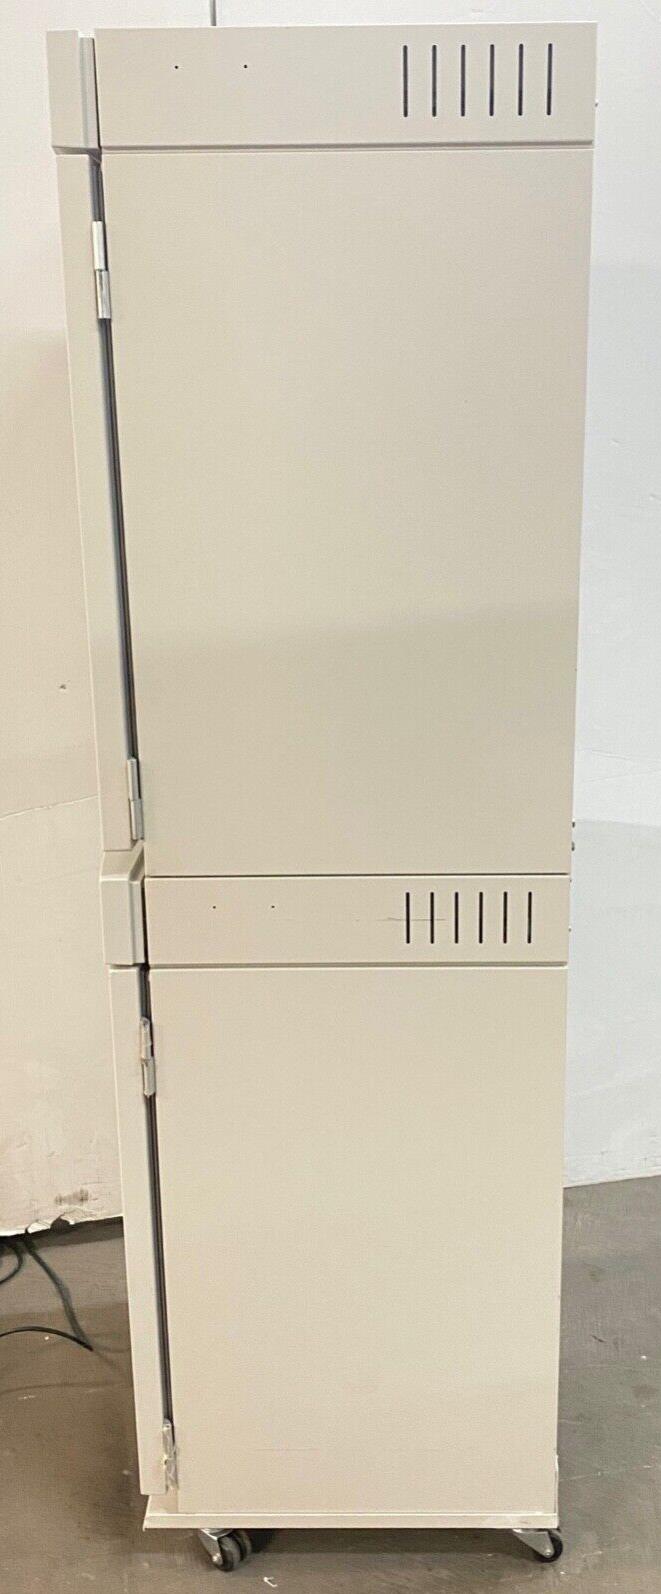 VWR Scientific 3074 Symphony Dual Stacked Water Jacketed CO2 Lab Incubators,